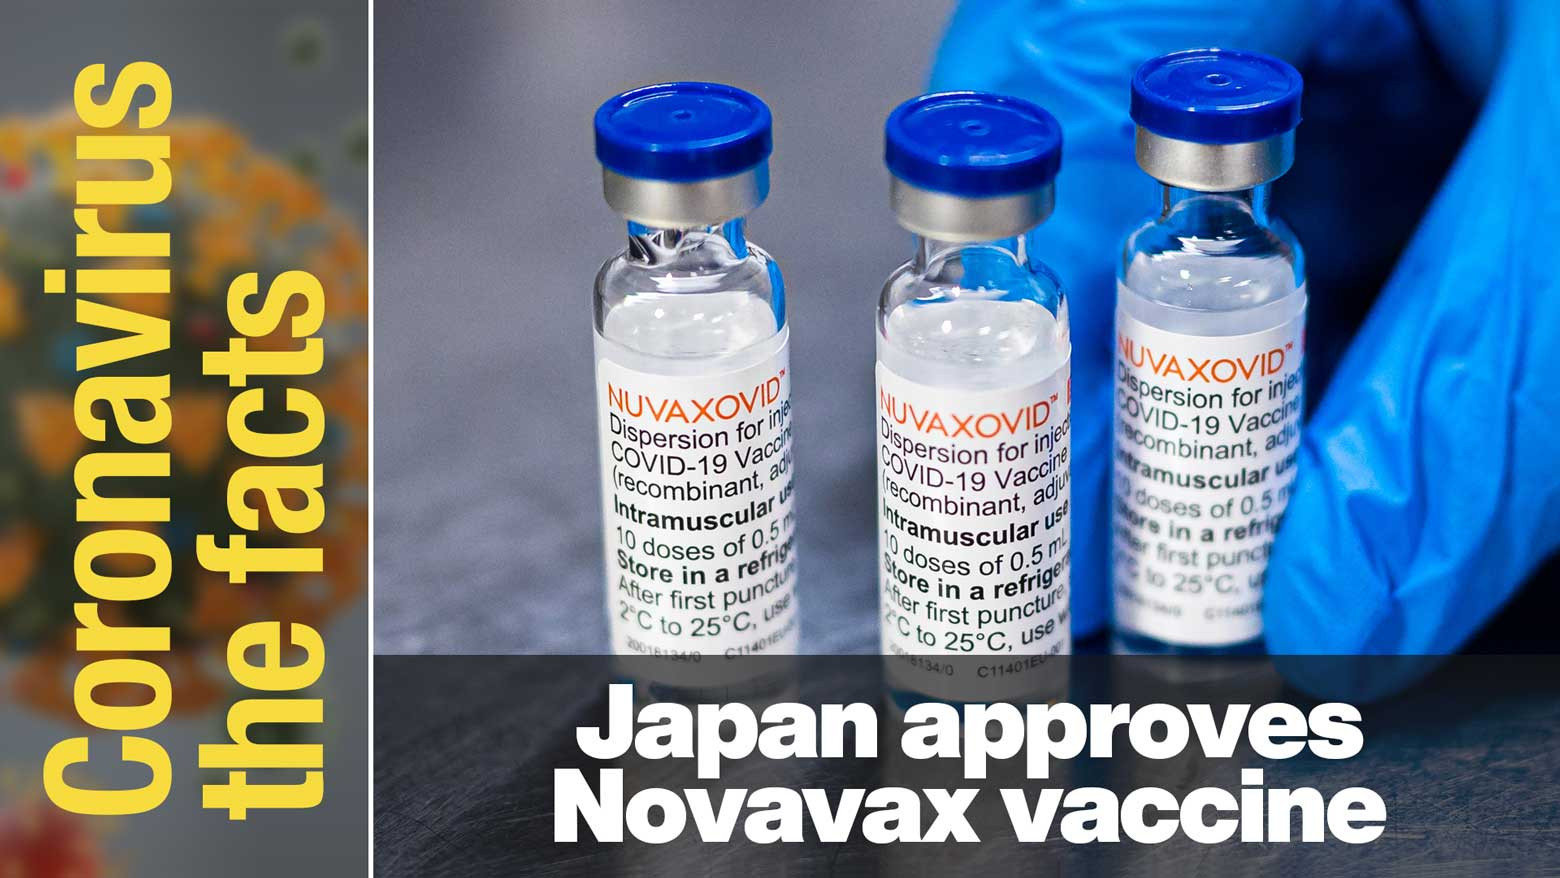 Novavax approved in Japan, expected to be available in late May